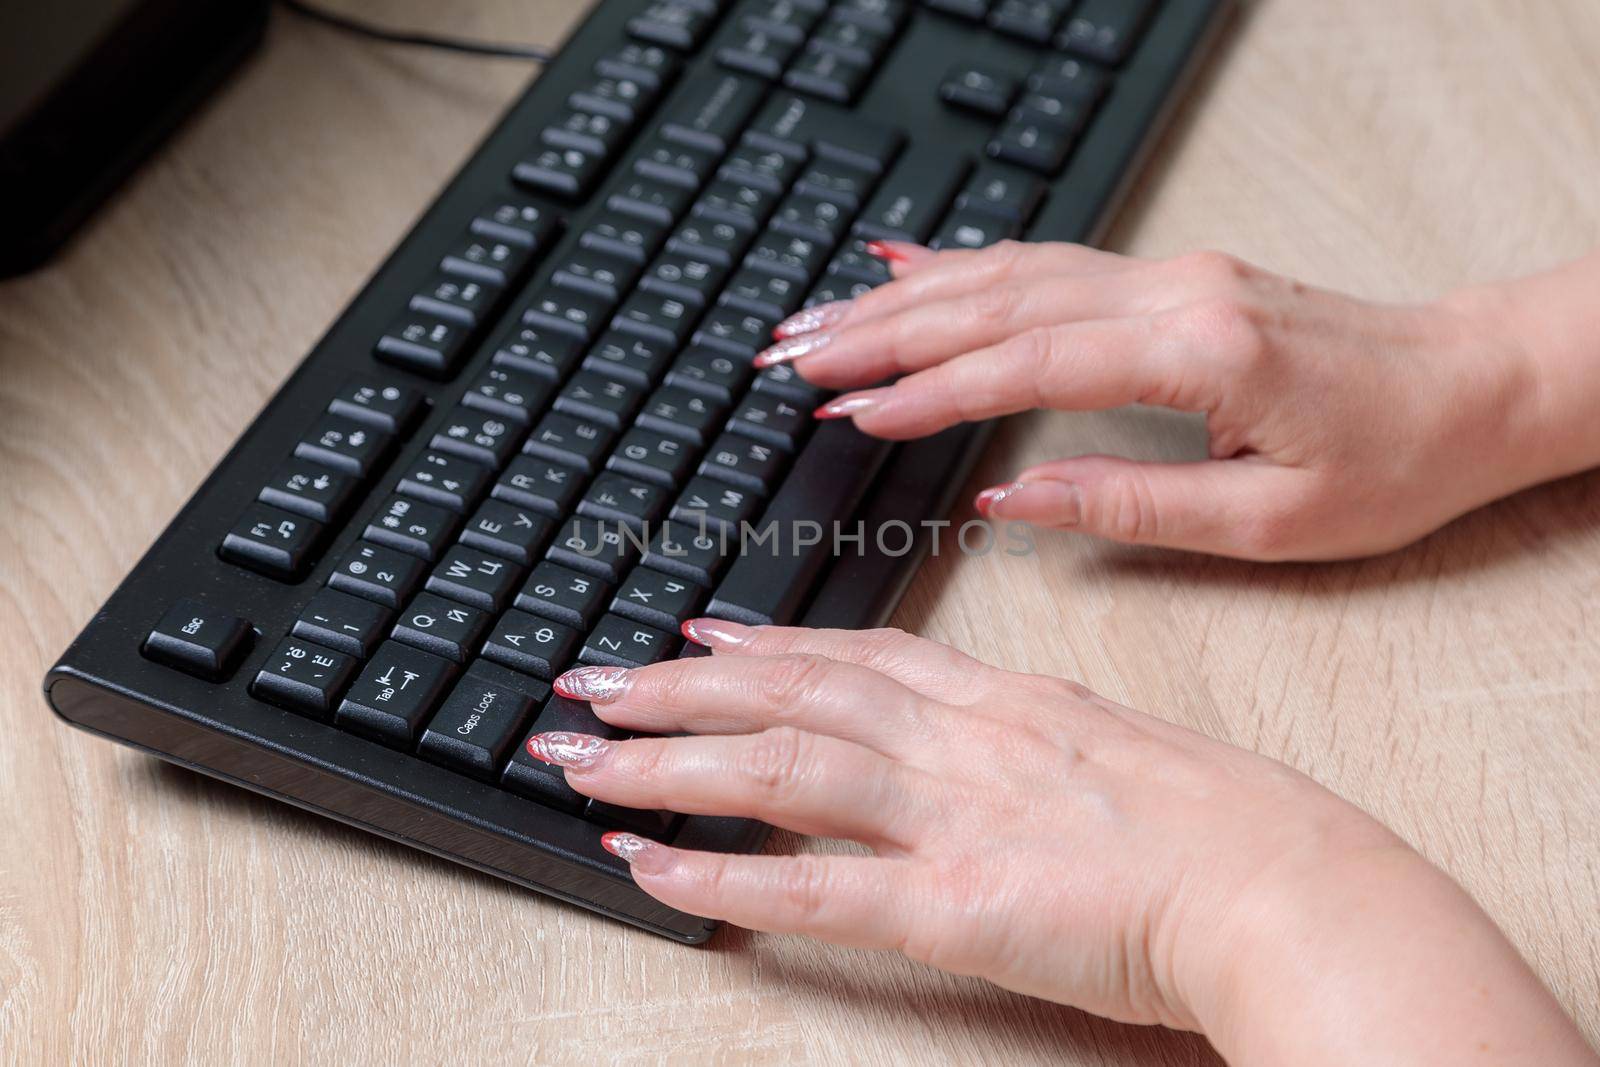 A woman director working in an office is sitting at a table, typing on a keyboard, checking documents. Close-up.